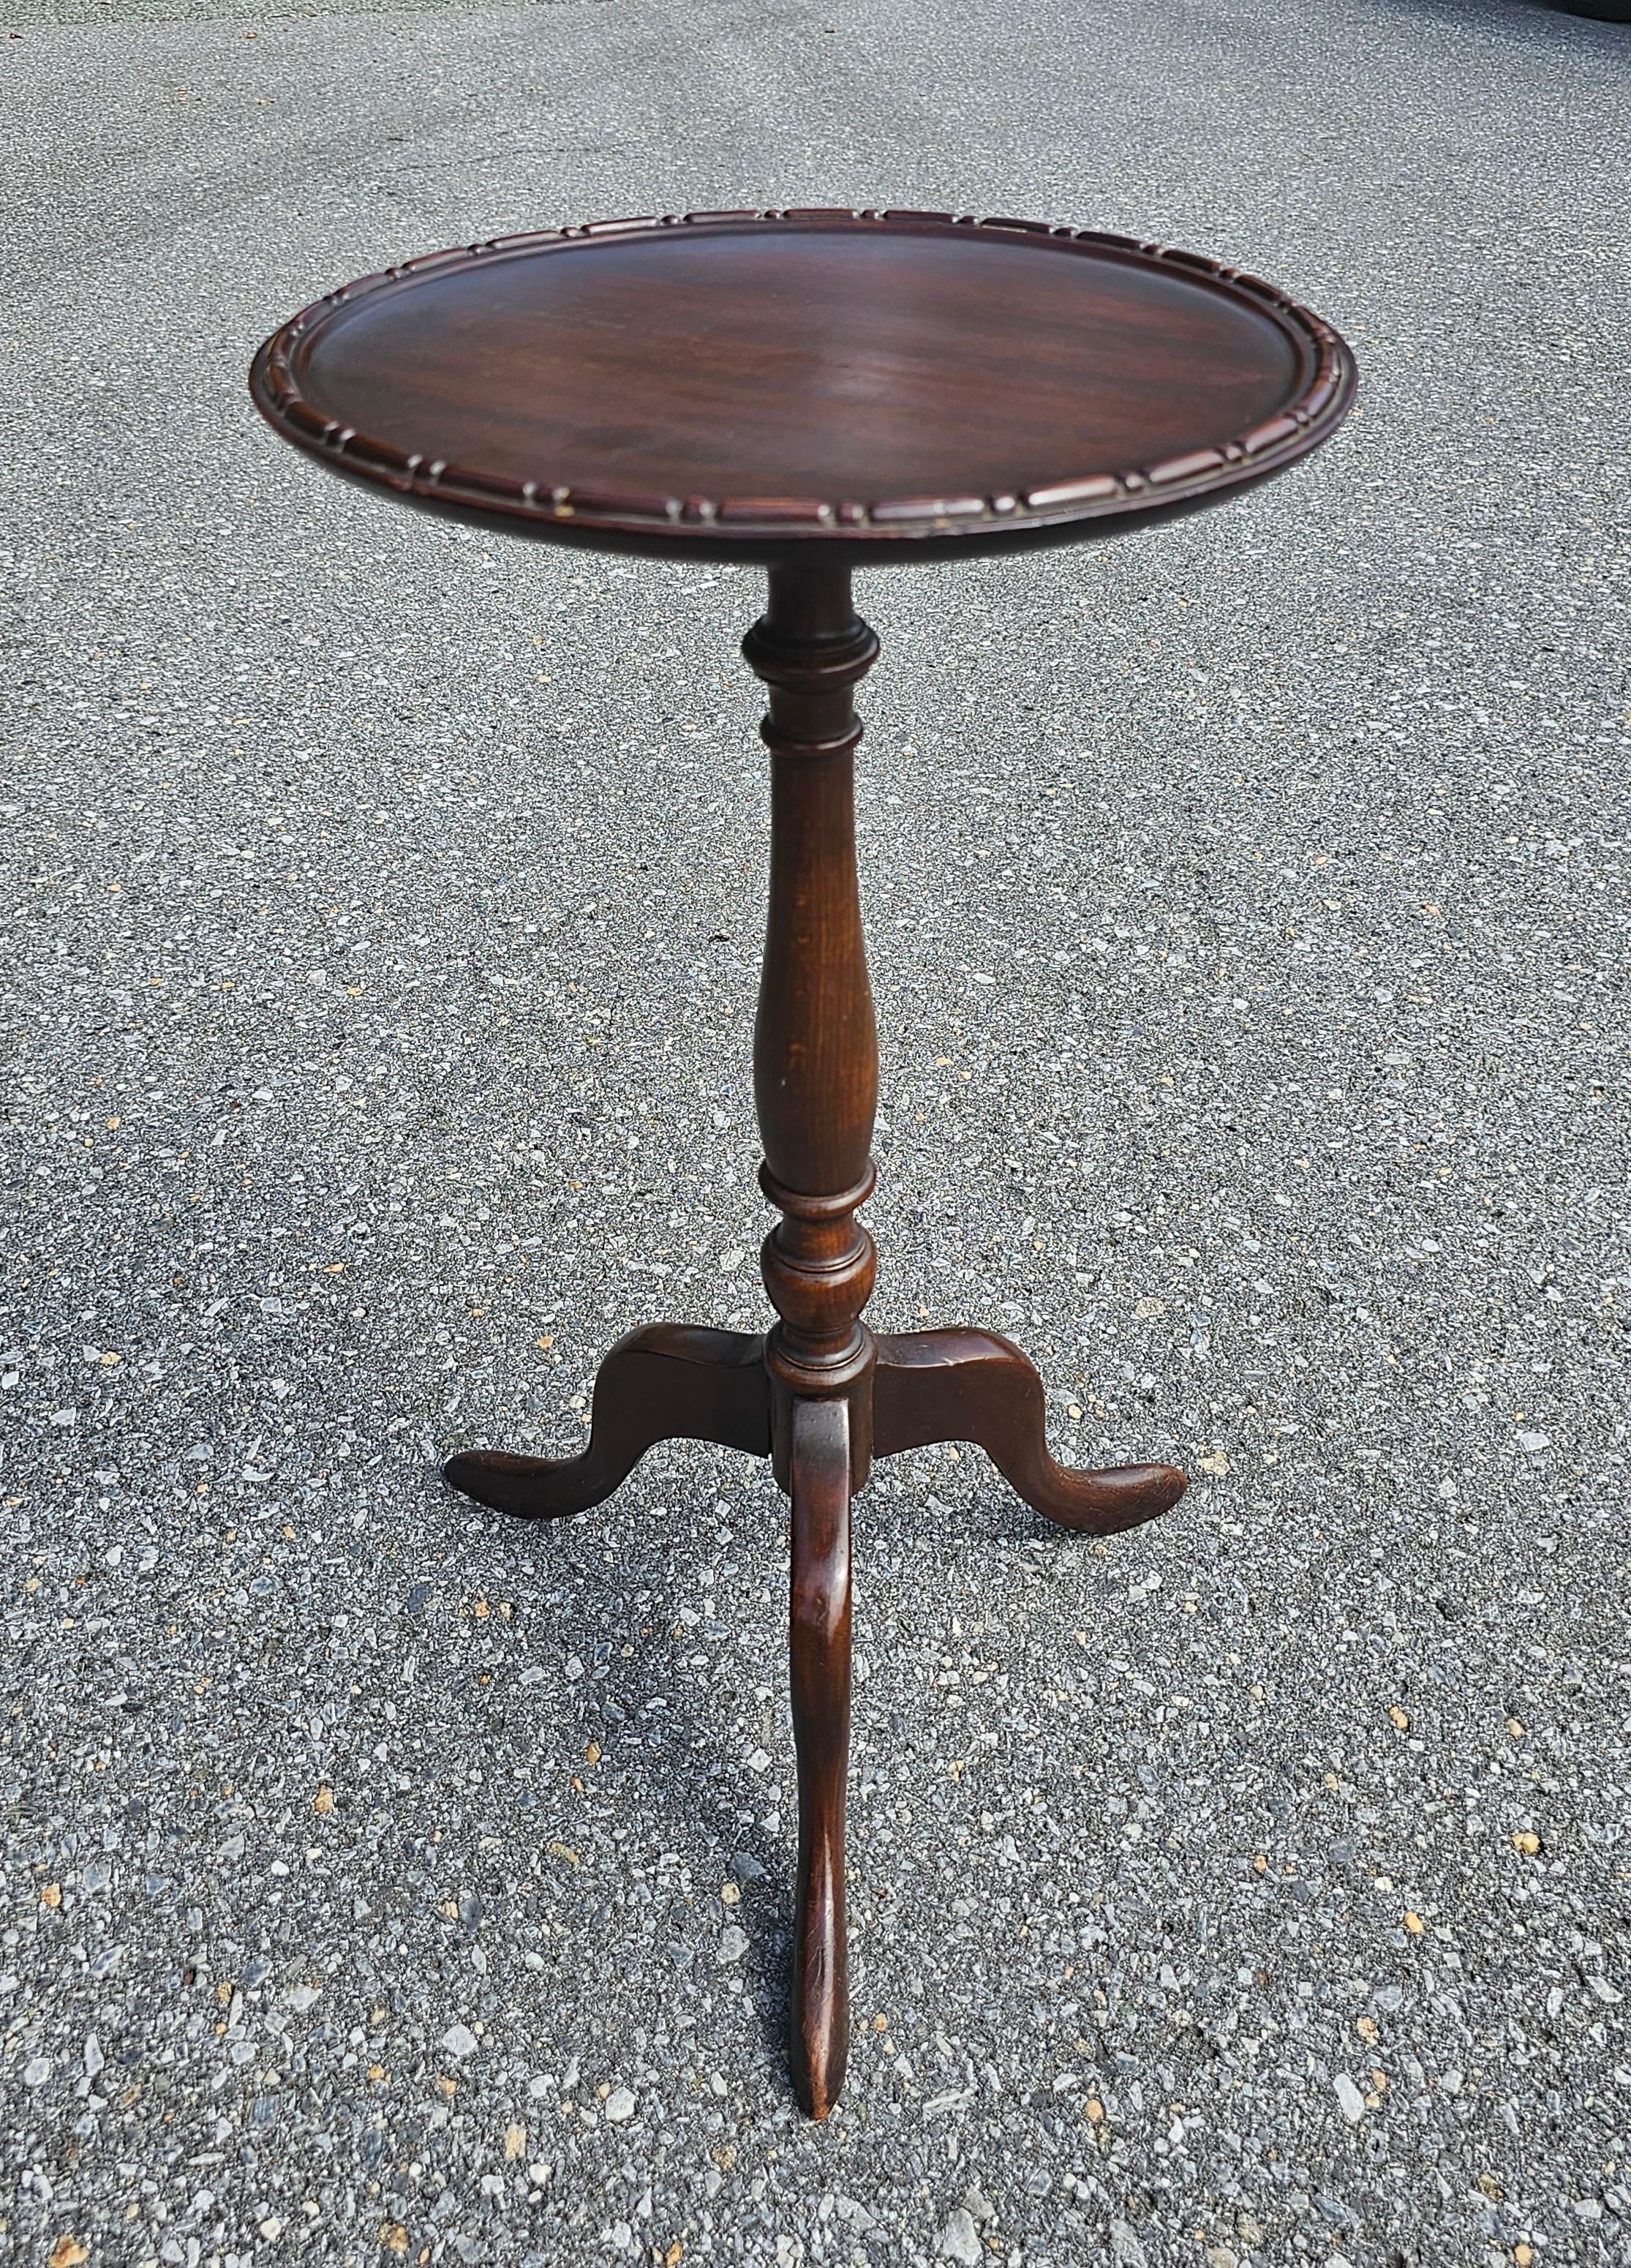 Early 20th Century George III Style Mahogany Refinished Candle Stand In Good Condition For Sale In Germantown, MD